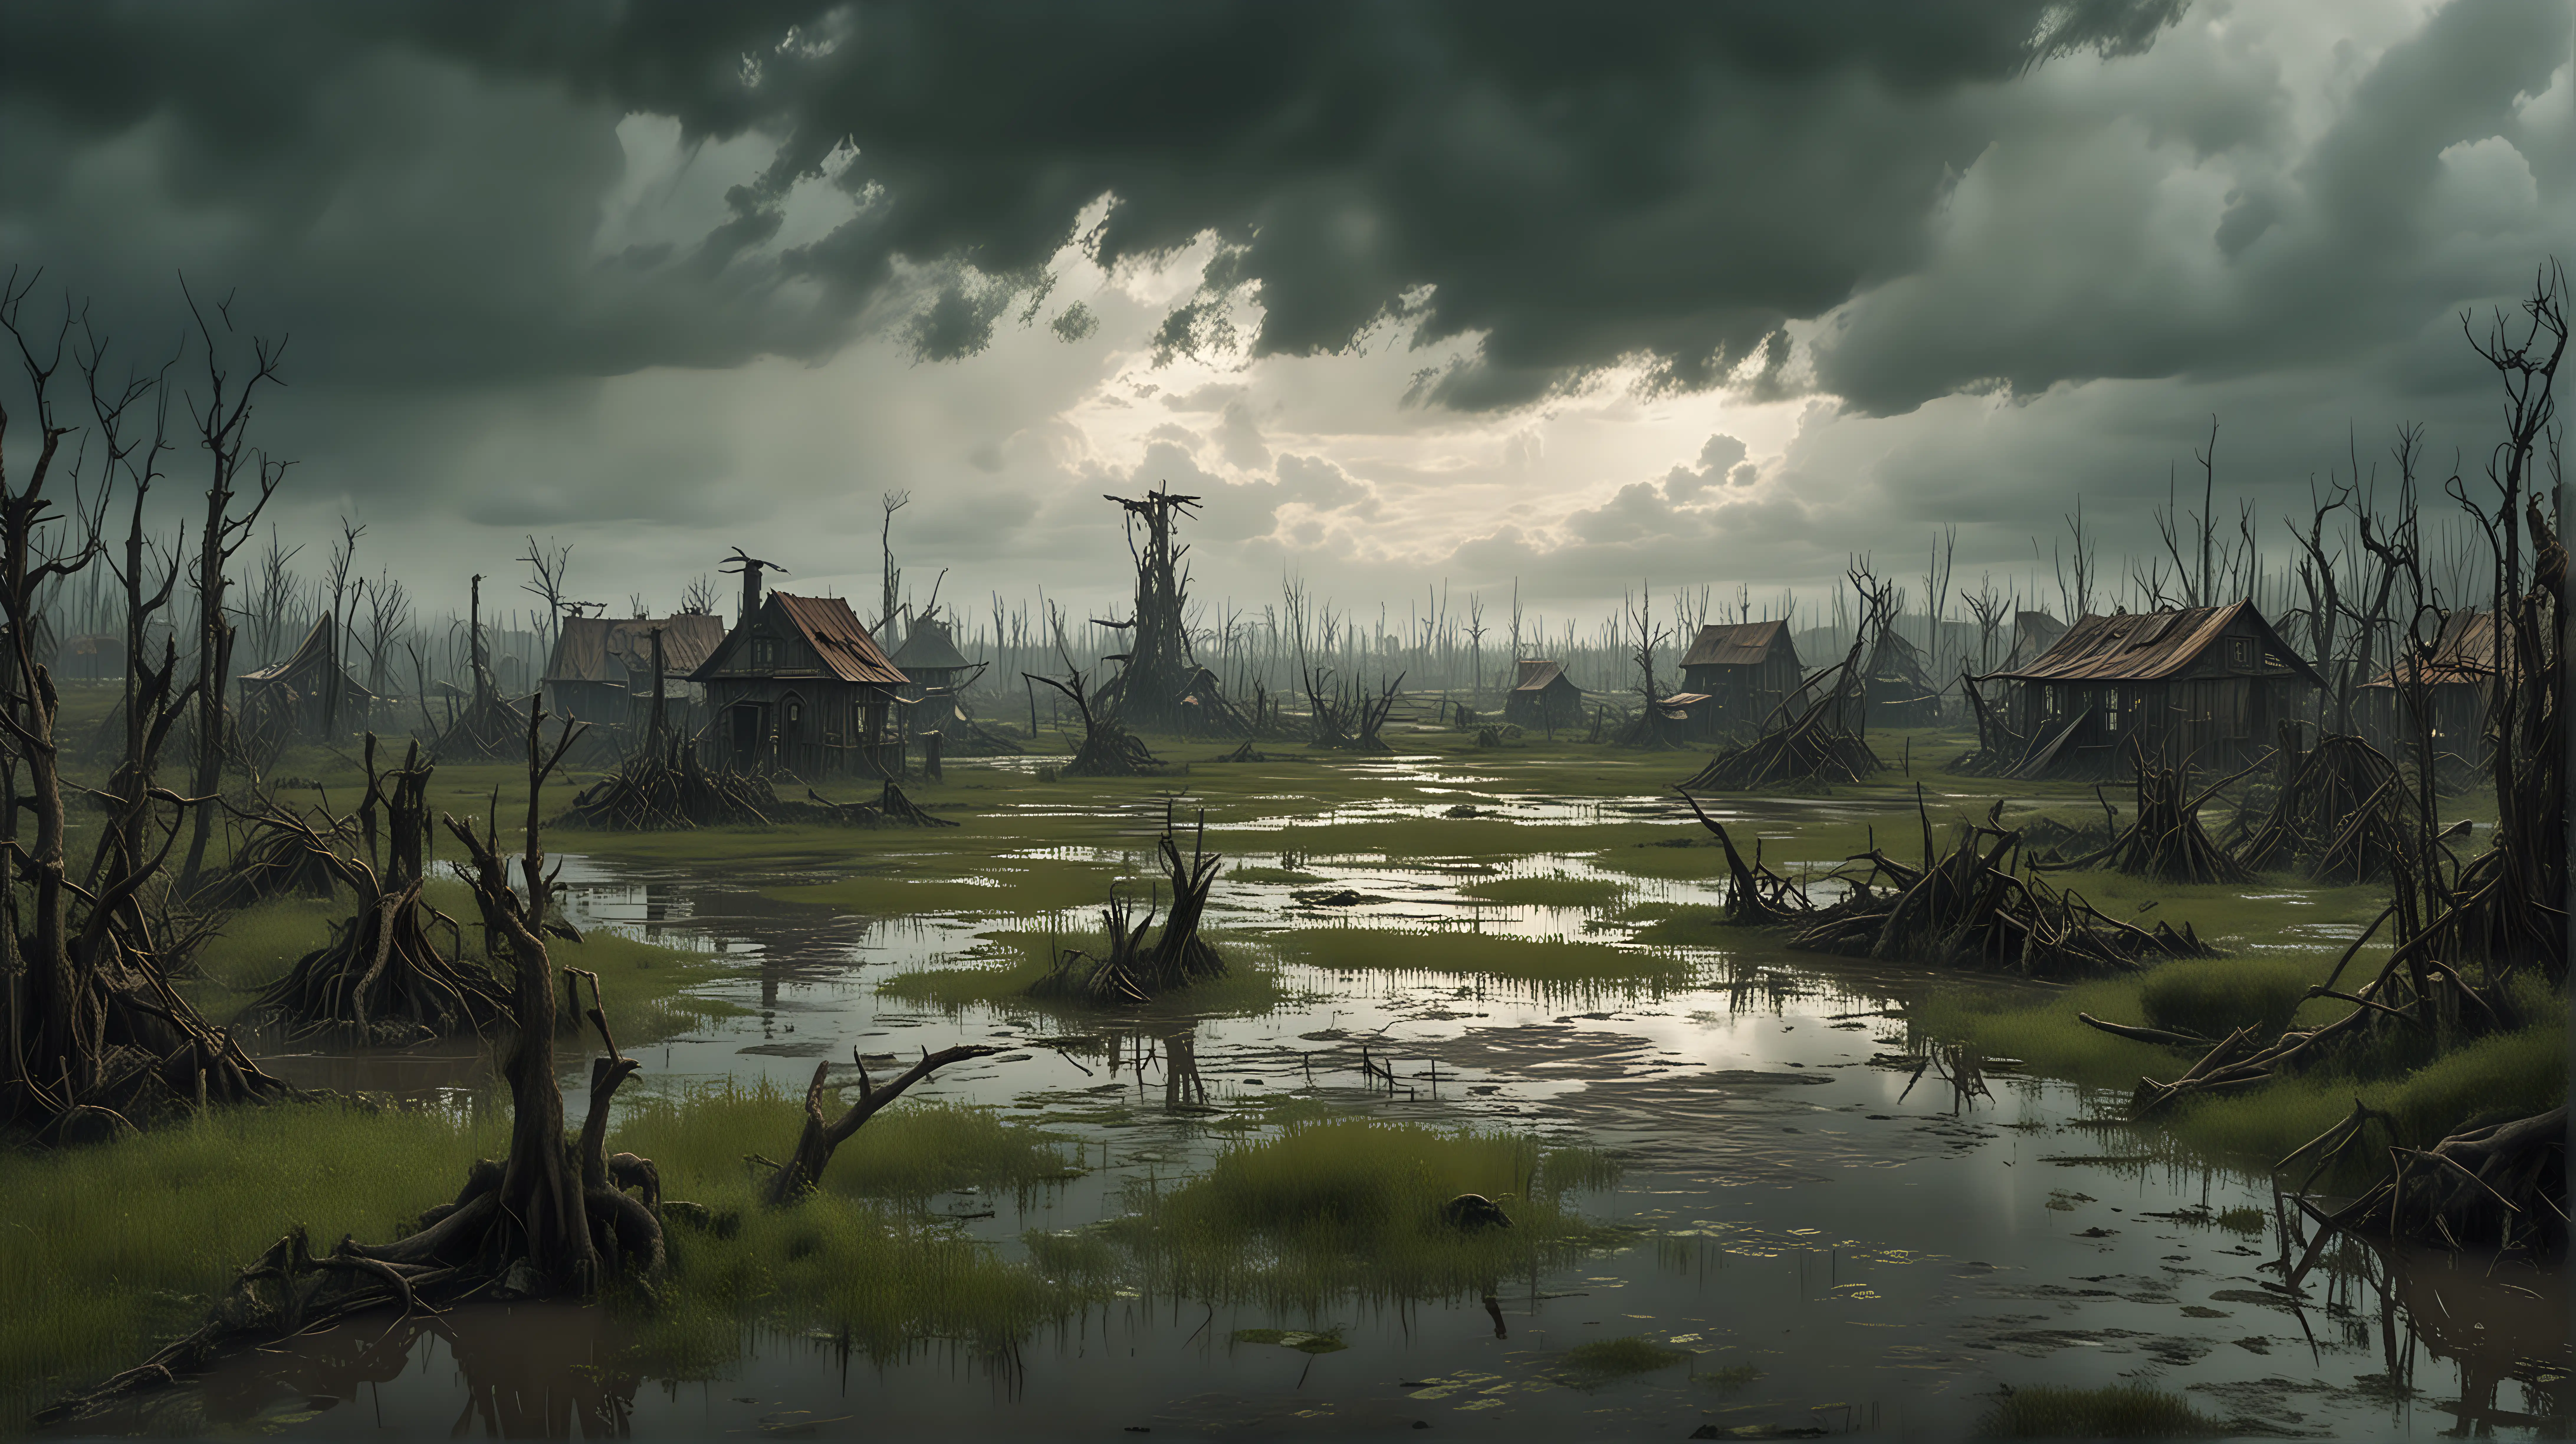 large swamps near a small steampunk village, stormy, distant view